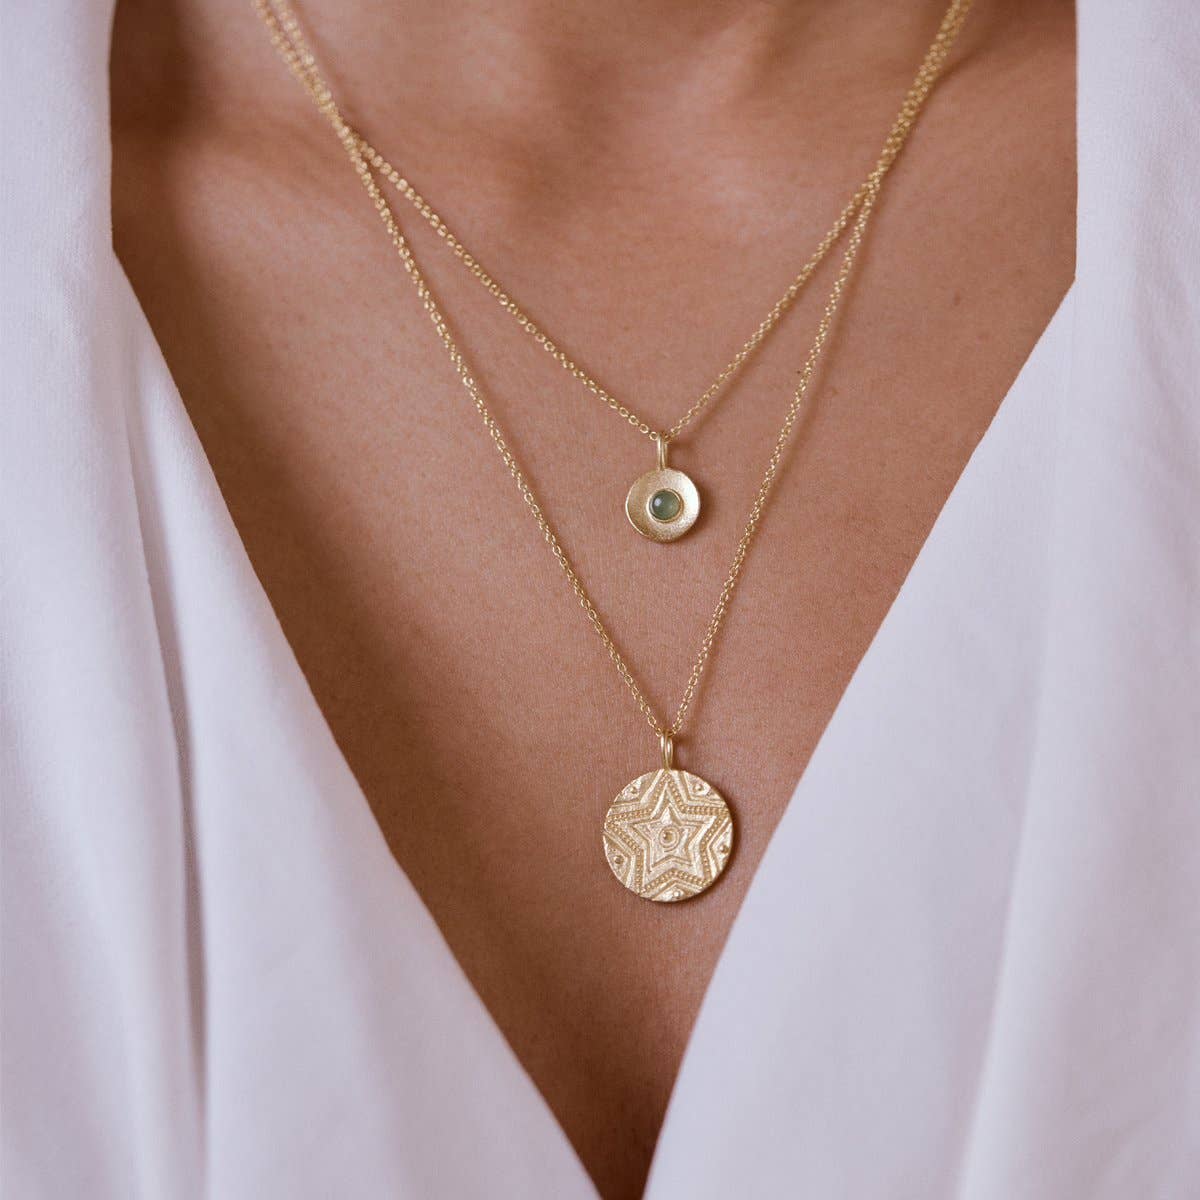 Petrus Necklace | Jewelry Gold Gift Waterproof